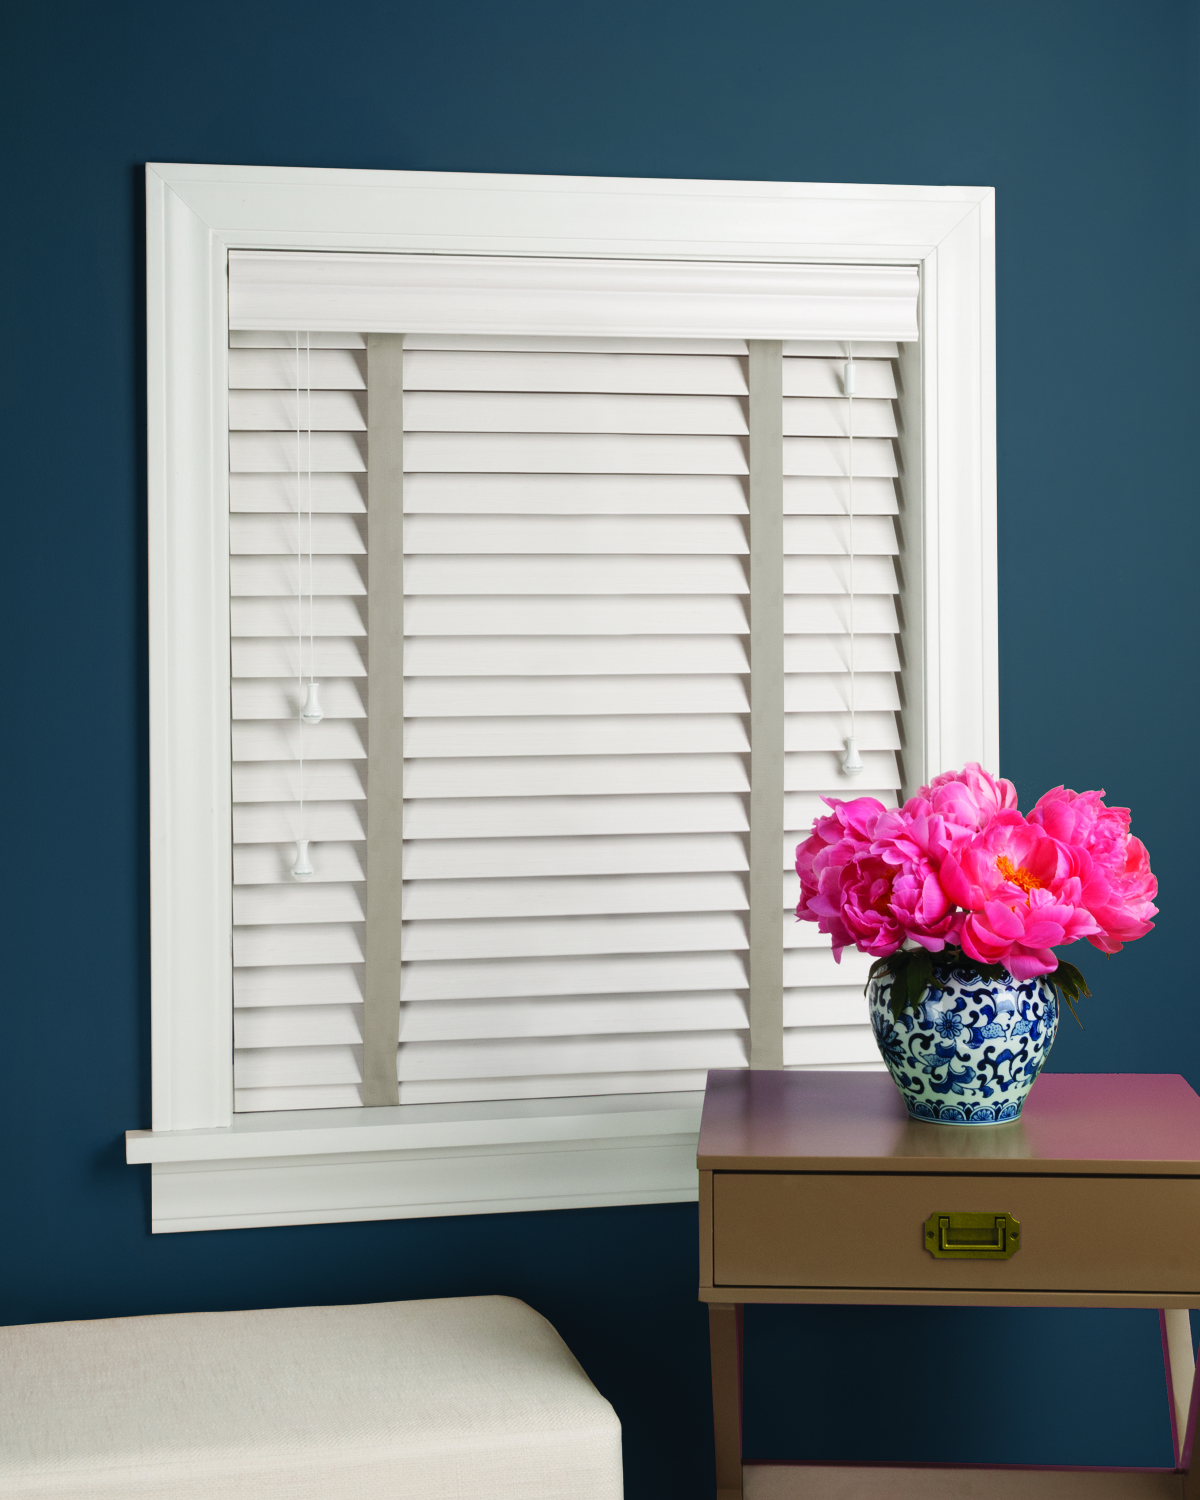 Natural 45cm x 210cm FURNISHED PVC Venetian Blinds Made to Measure Wood Effect Window Blind New